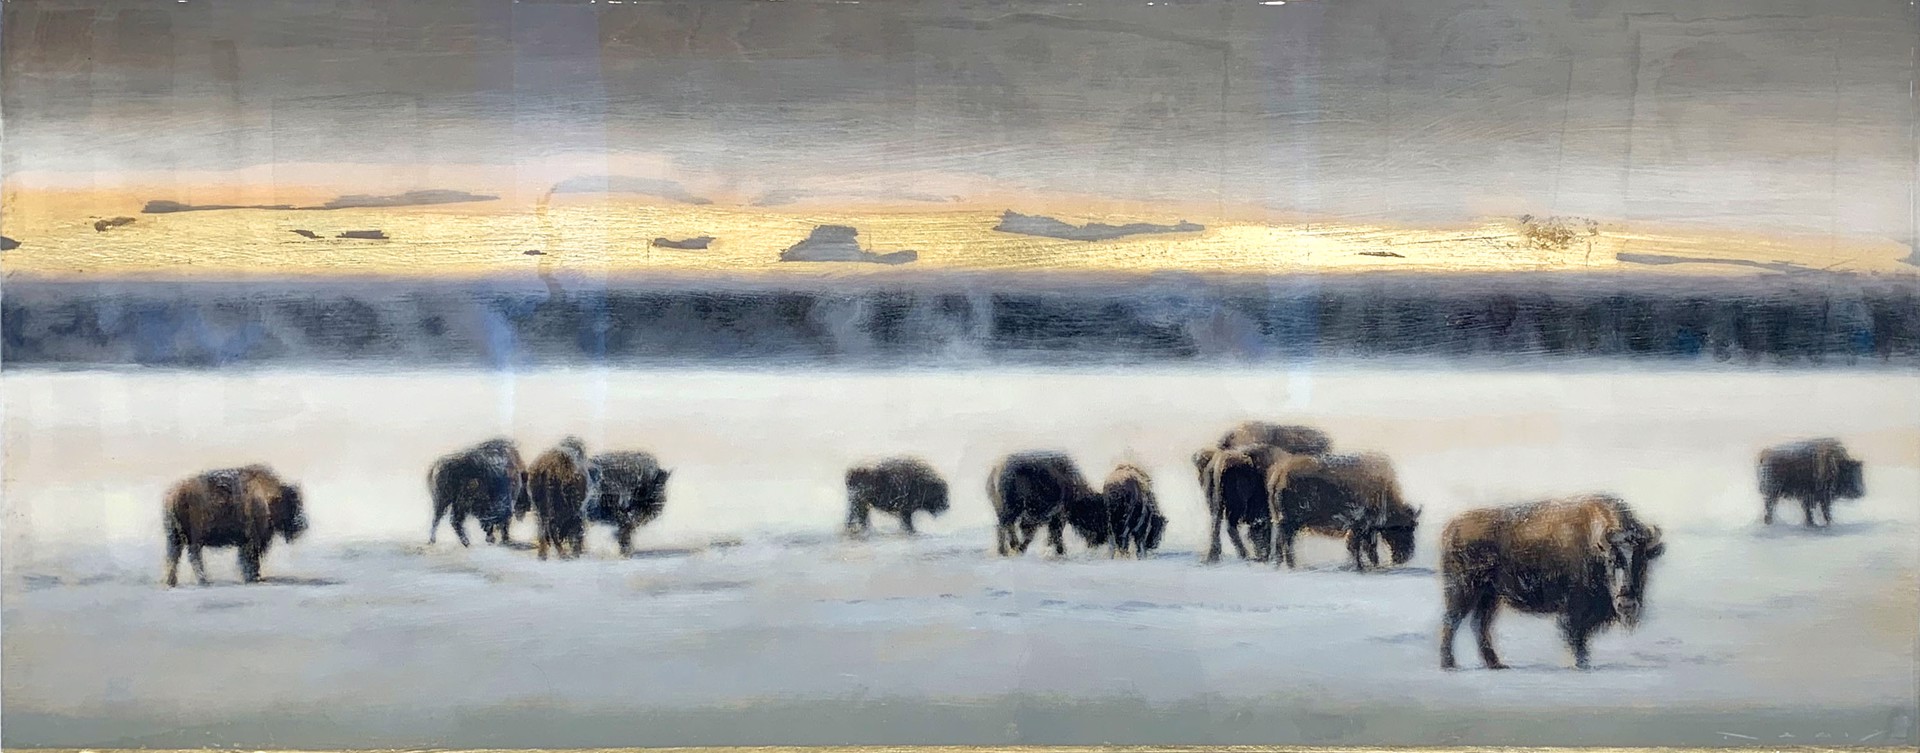 Original Painting Featuring Bison On Snow Covered Landscape With Mountains In The Distance And Gold Leaf Tinted Clouds